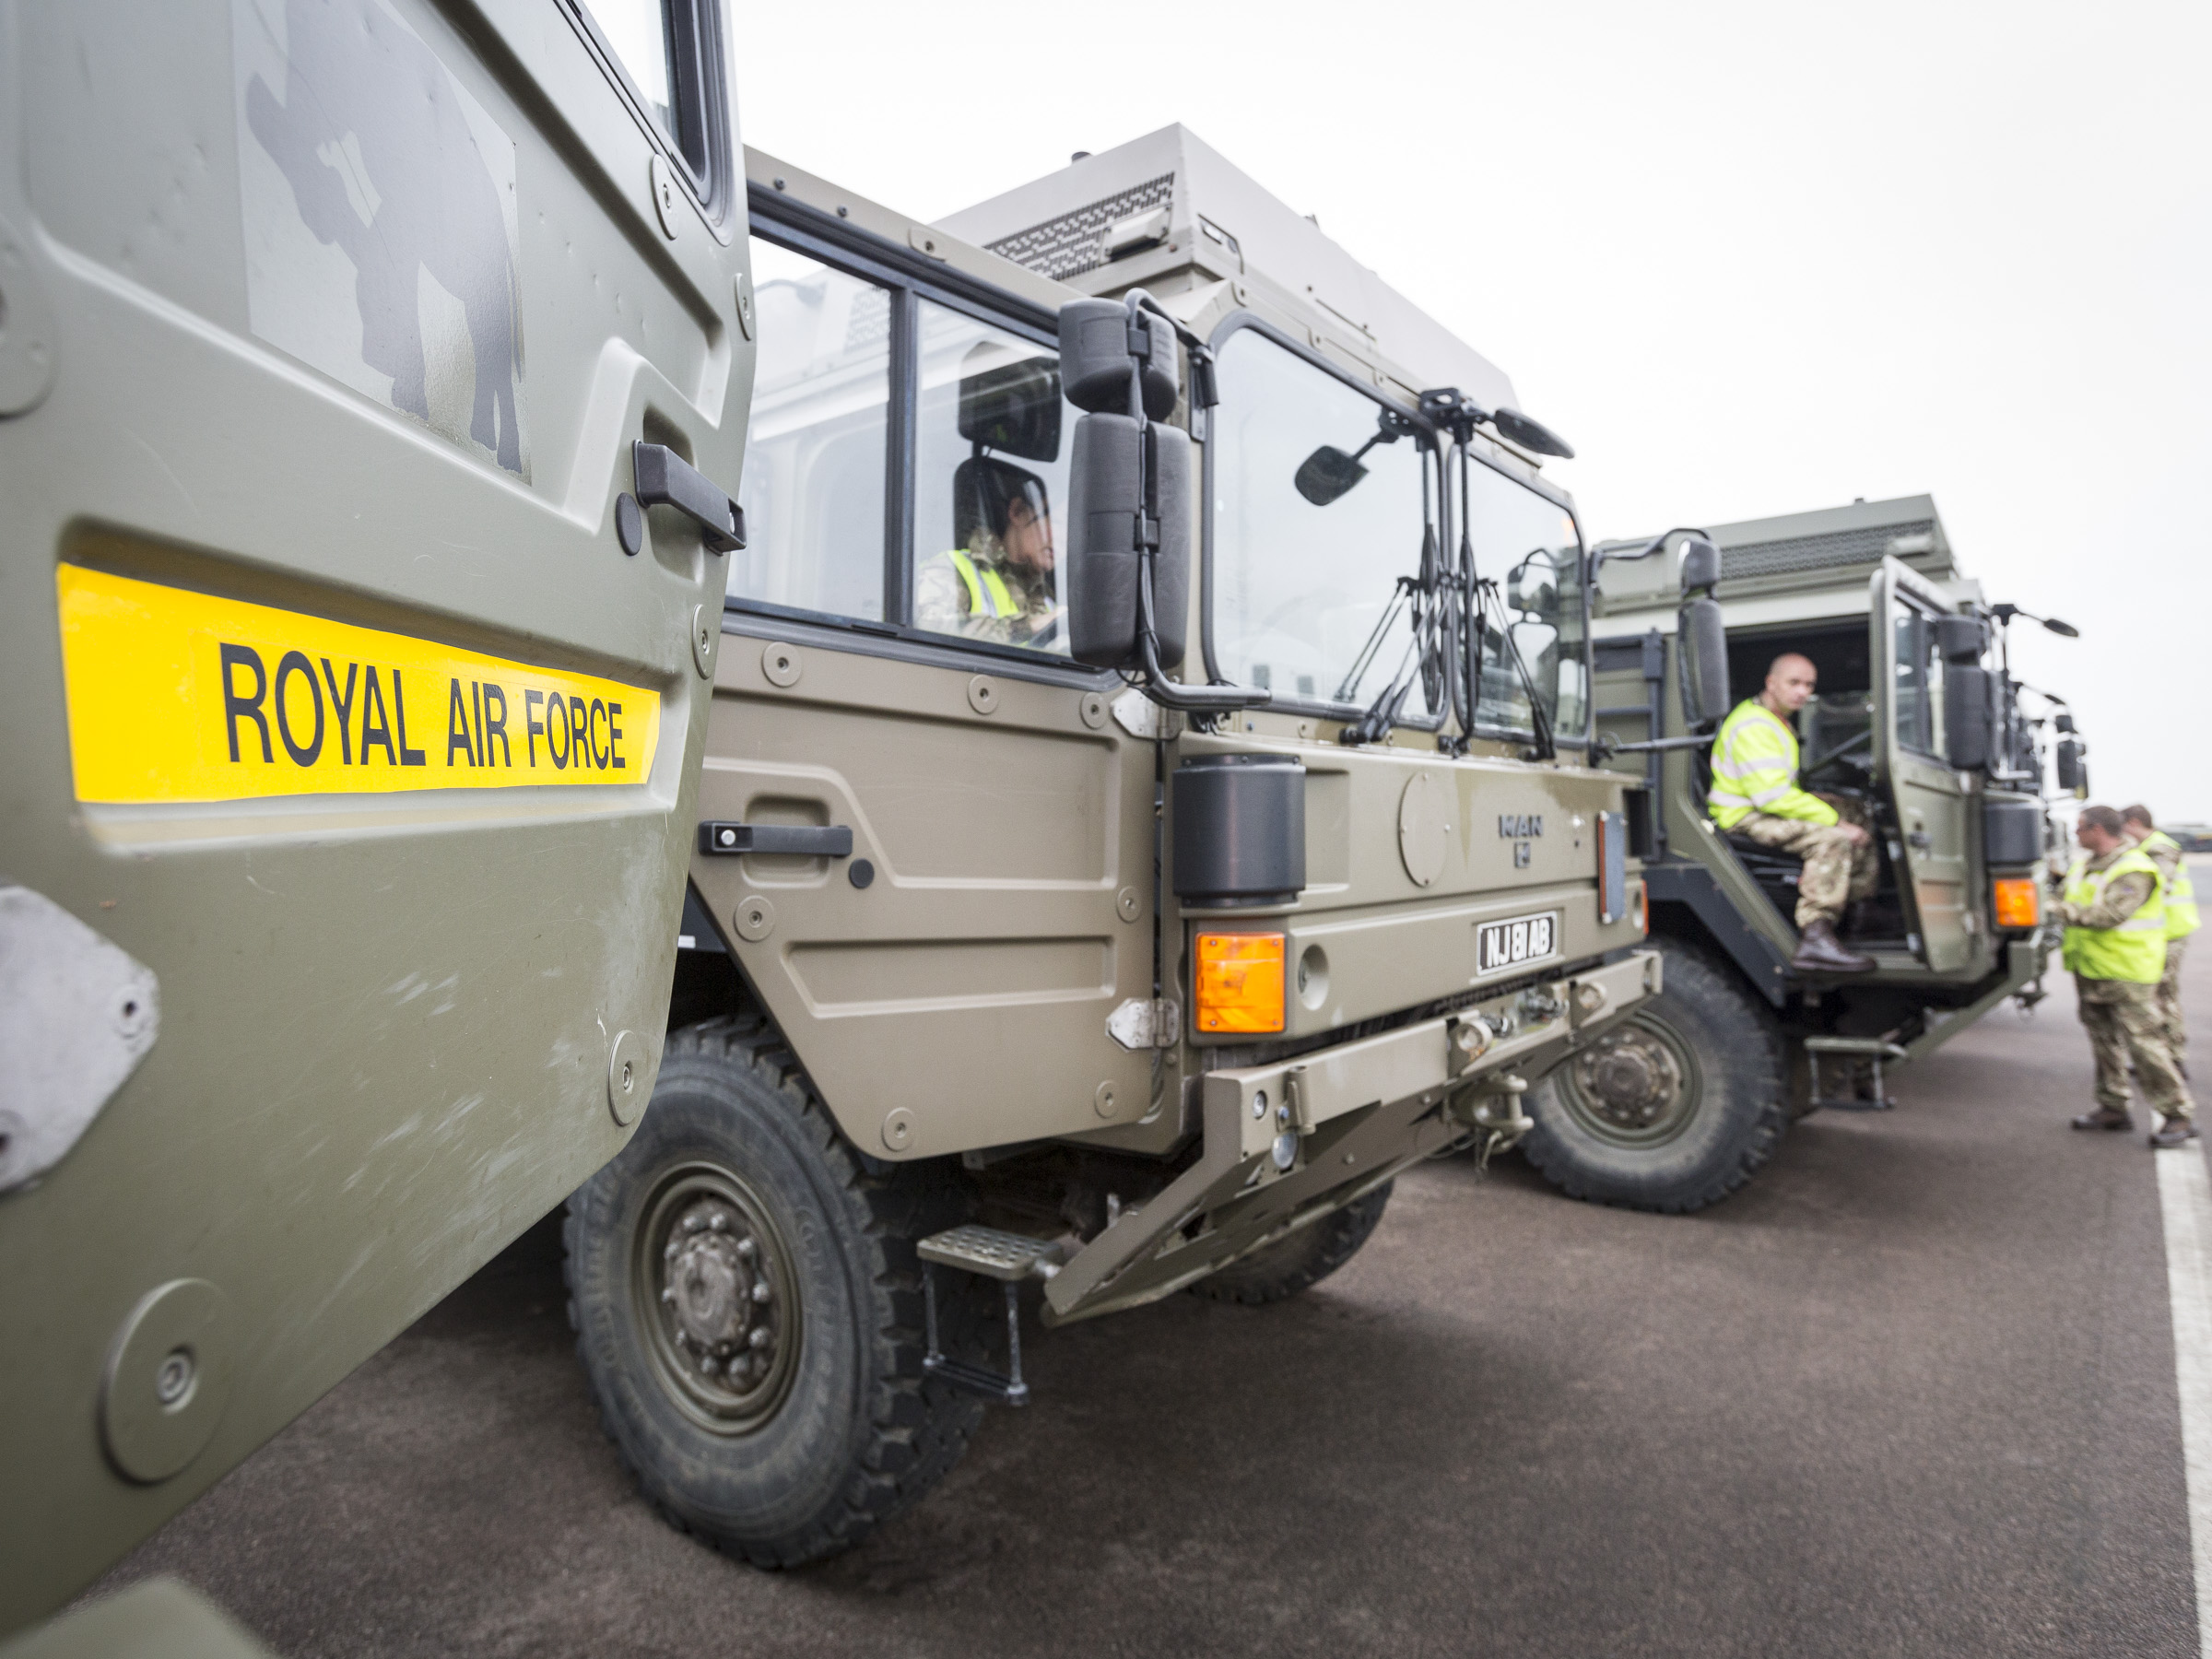 504 Squadron drivers during a training weekend